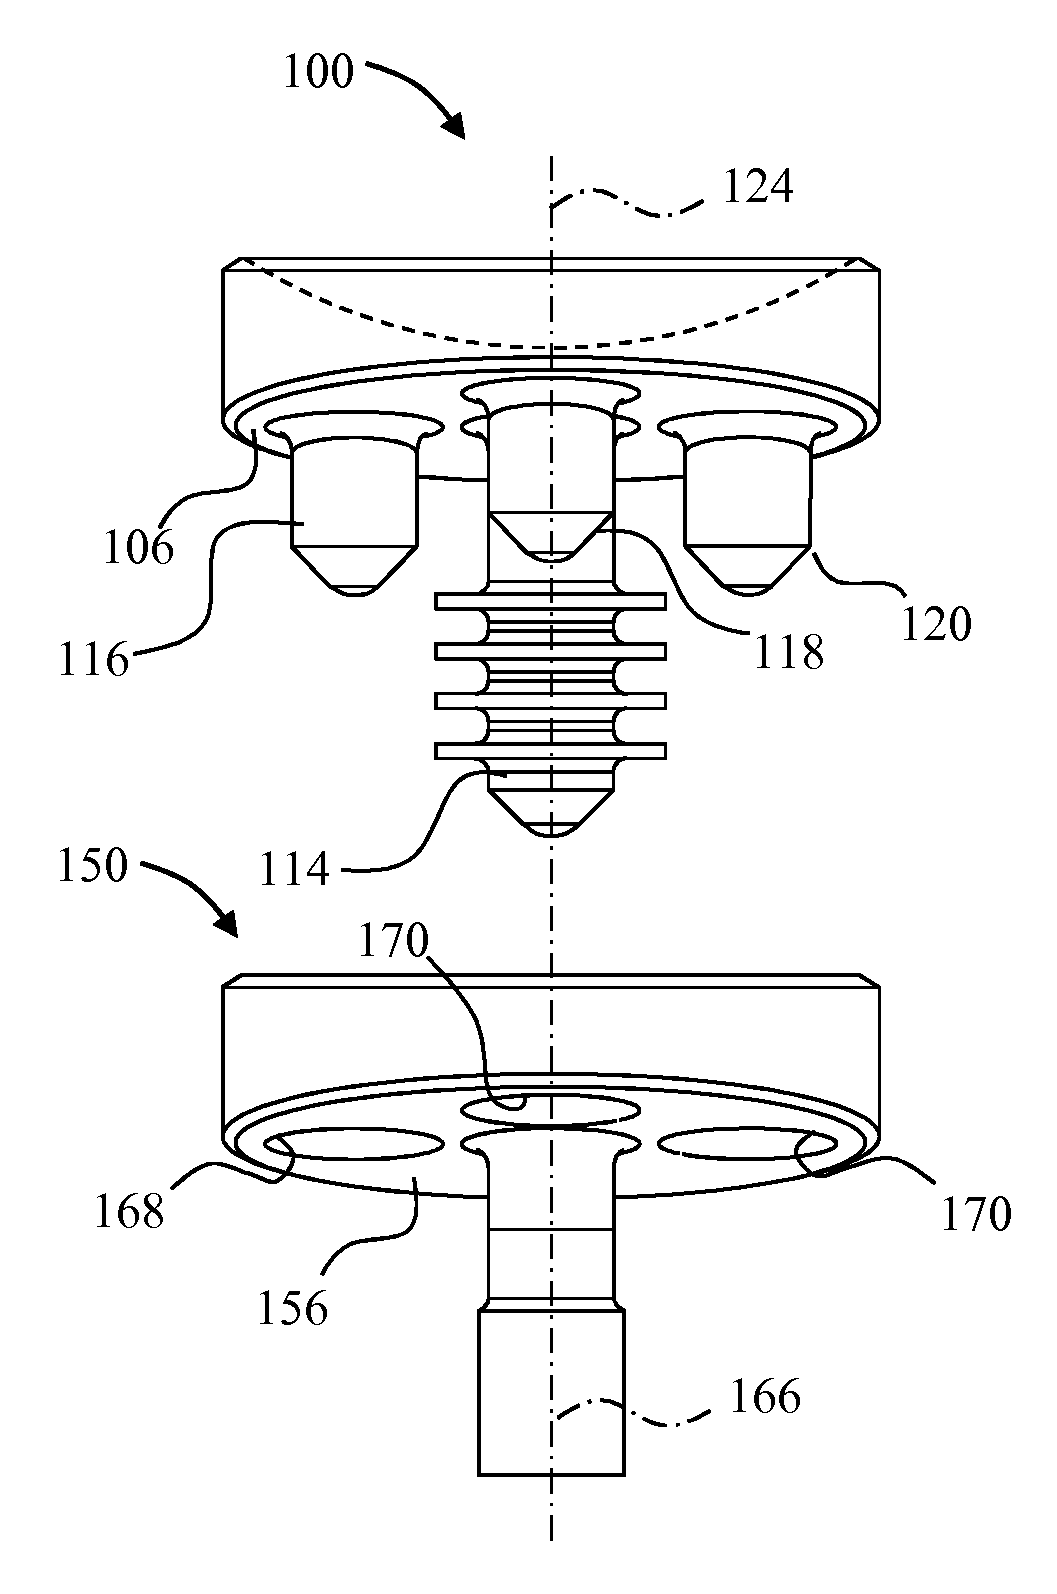 Device and Method for Retroversion Correction for Shoulder Arthroplasty